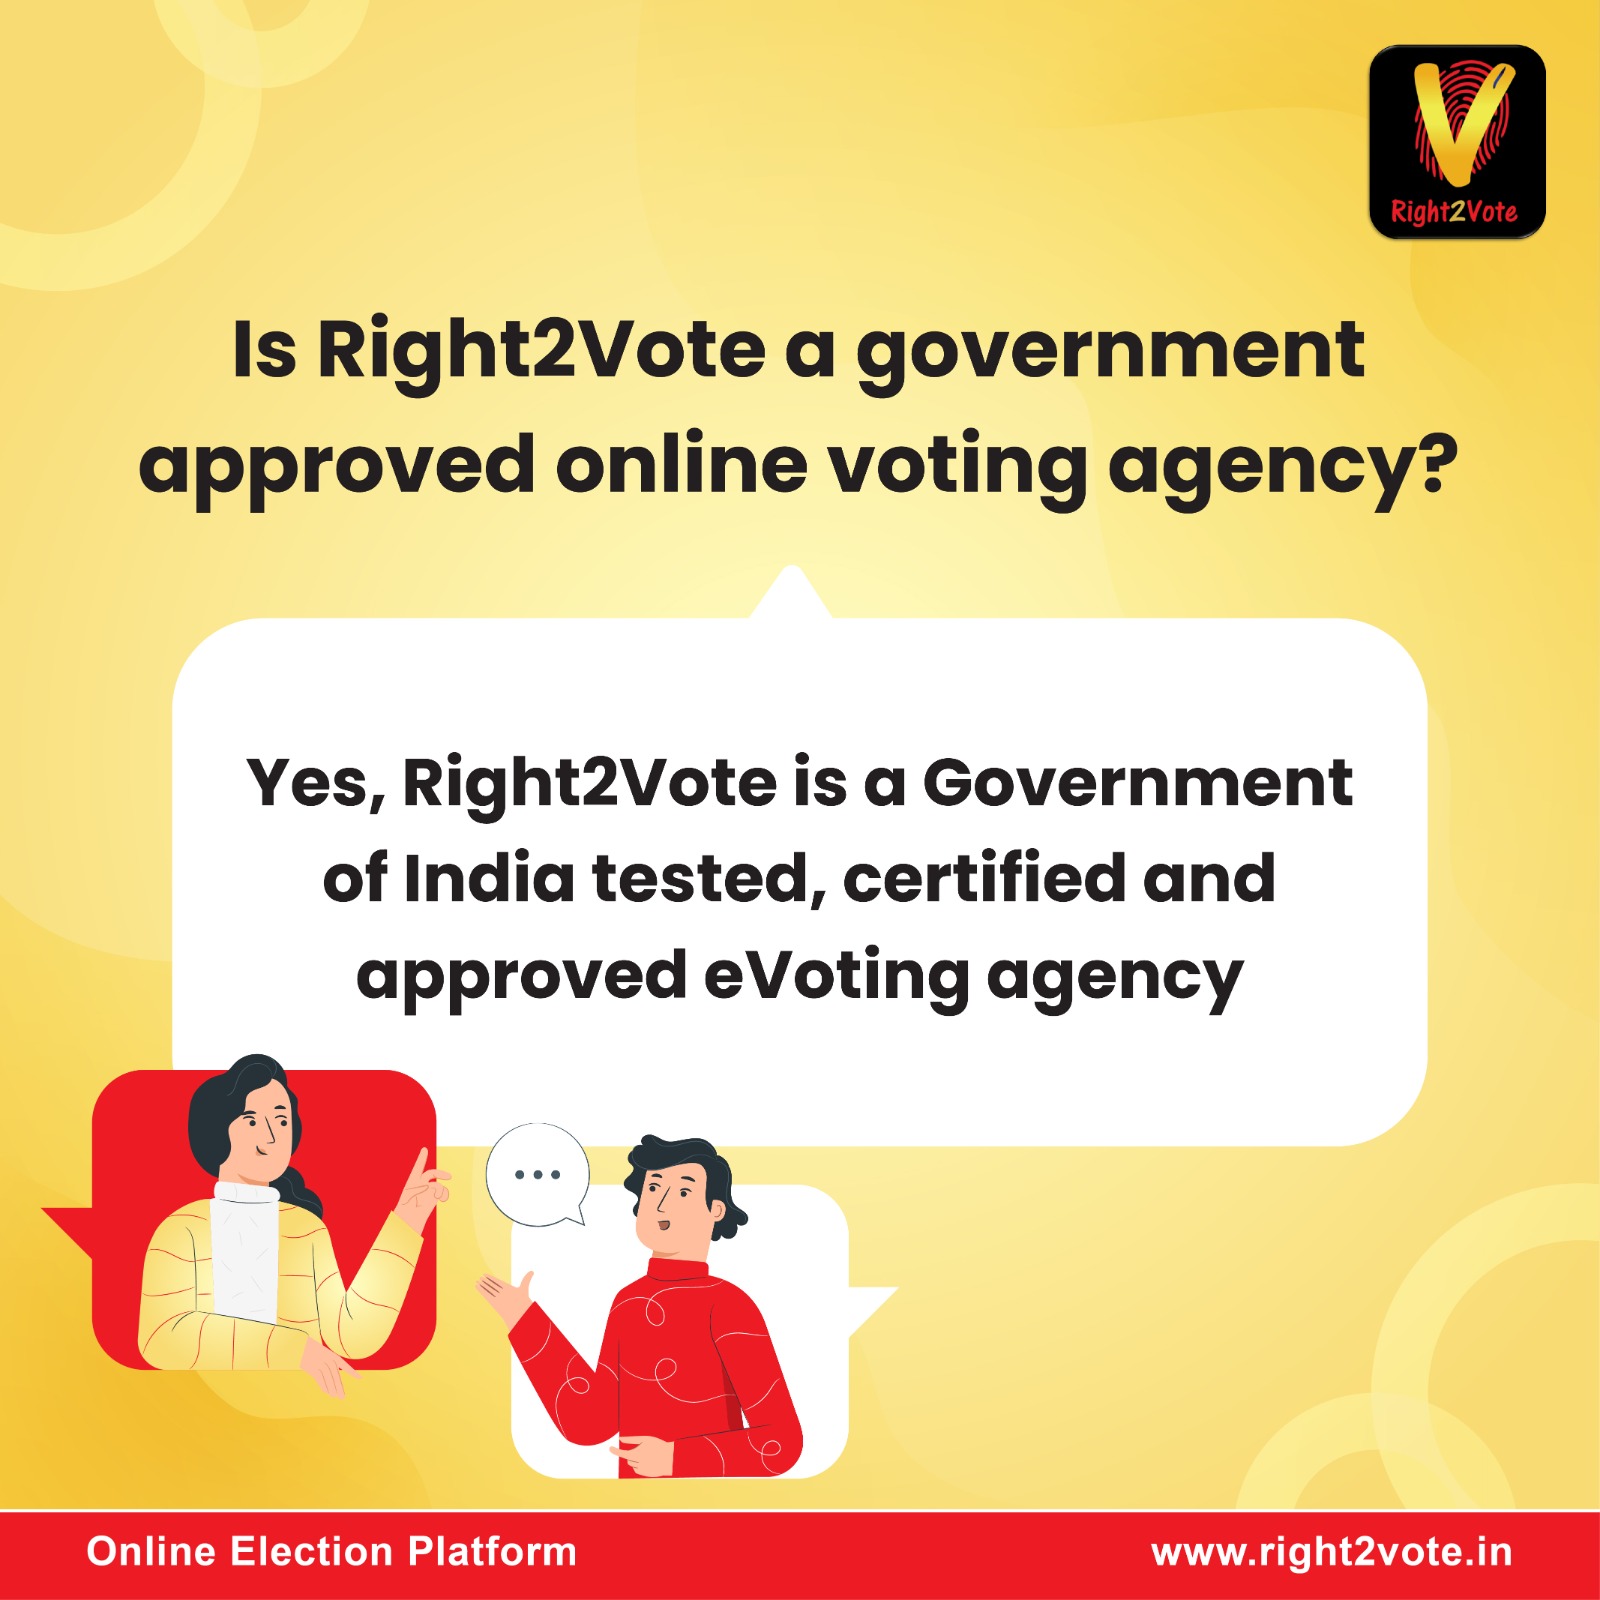 Is_right2vote_gov_approved - Right2Vote